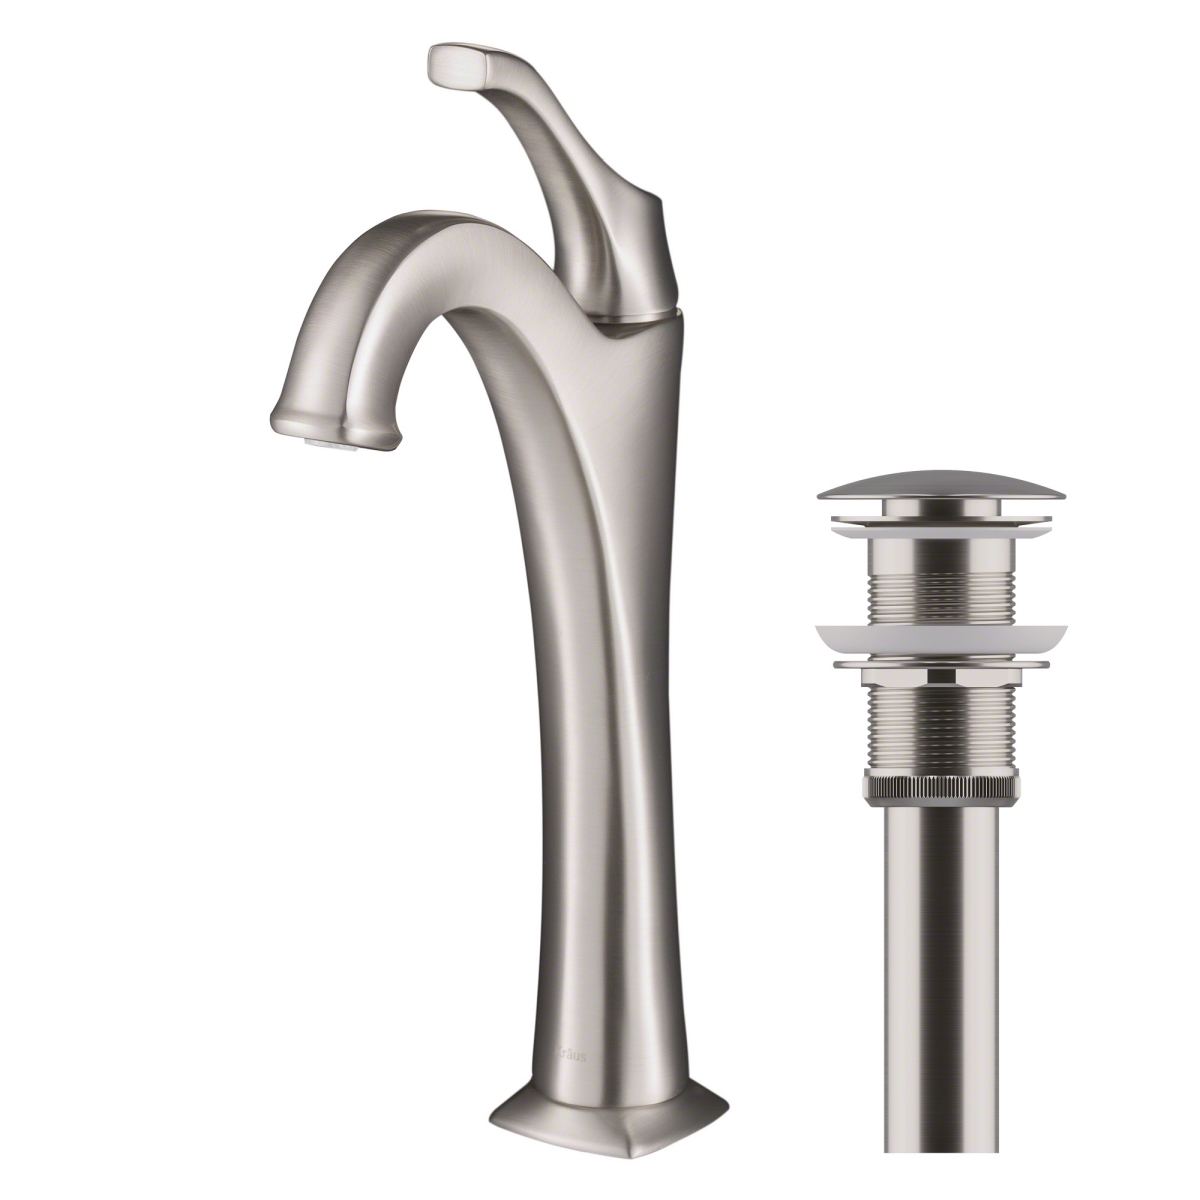 Kraus Usa Kvf-1200sfs Arlo Single Handle Vessel Bathroom Faucet In All-brite Spot - Stainless